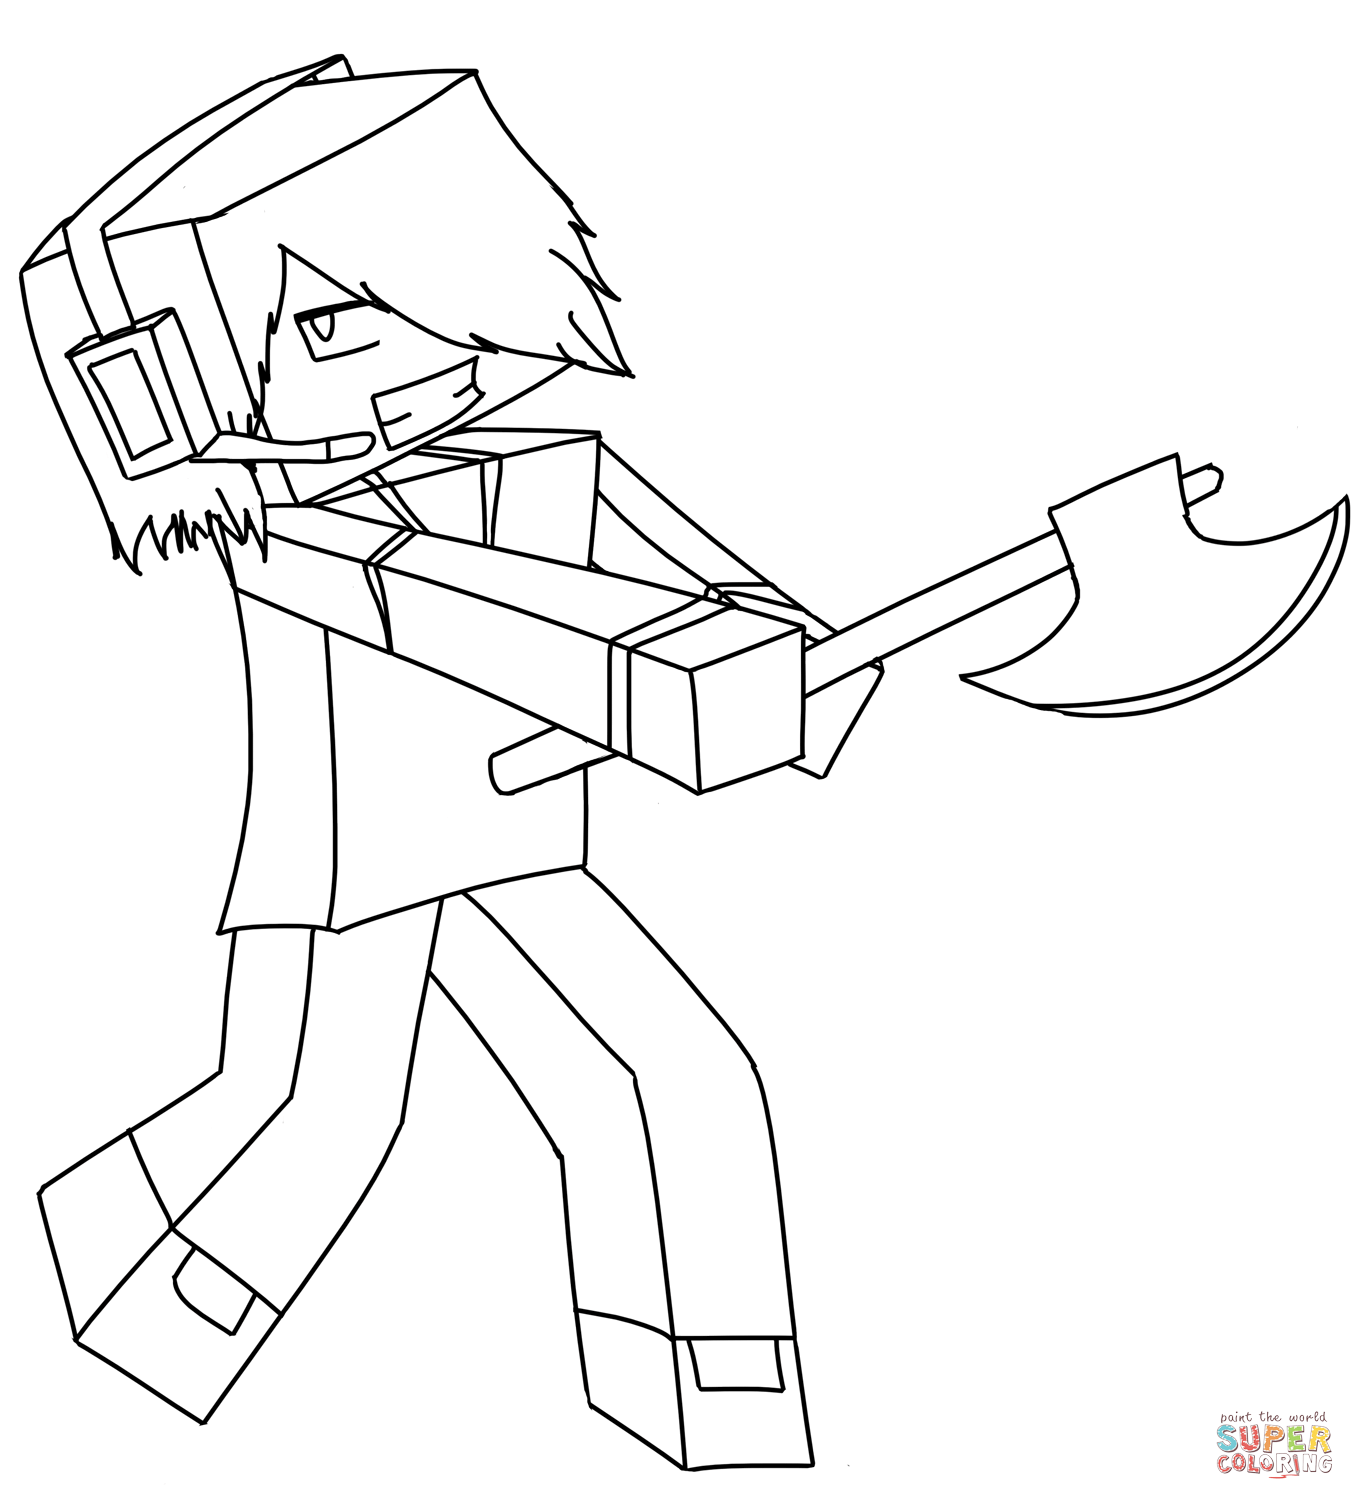 Minecraft coloring pages | Free Coloring Pages